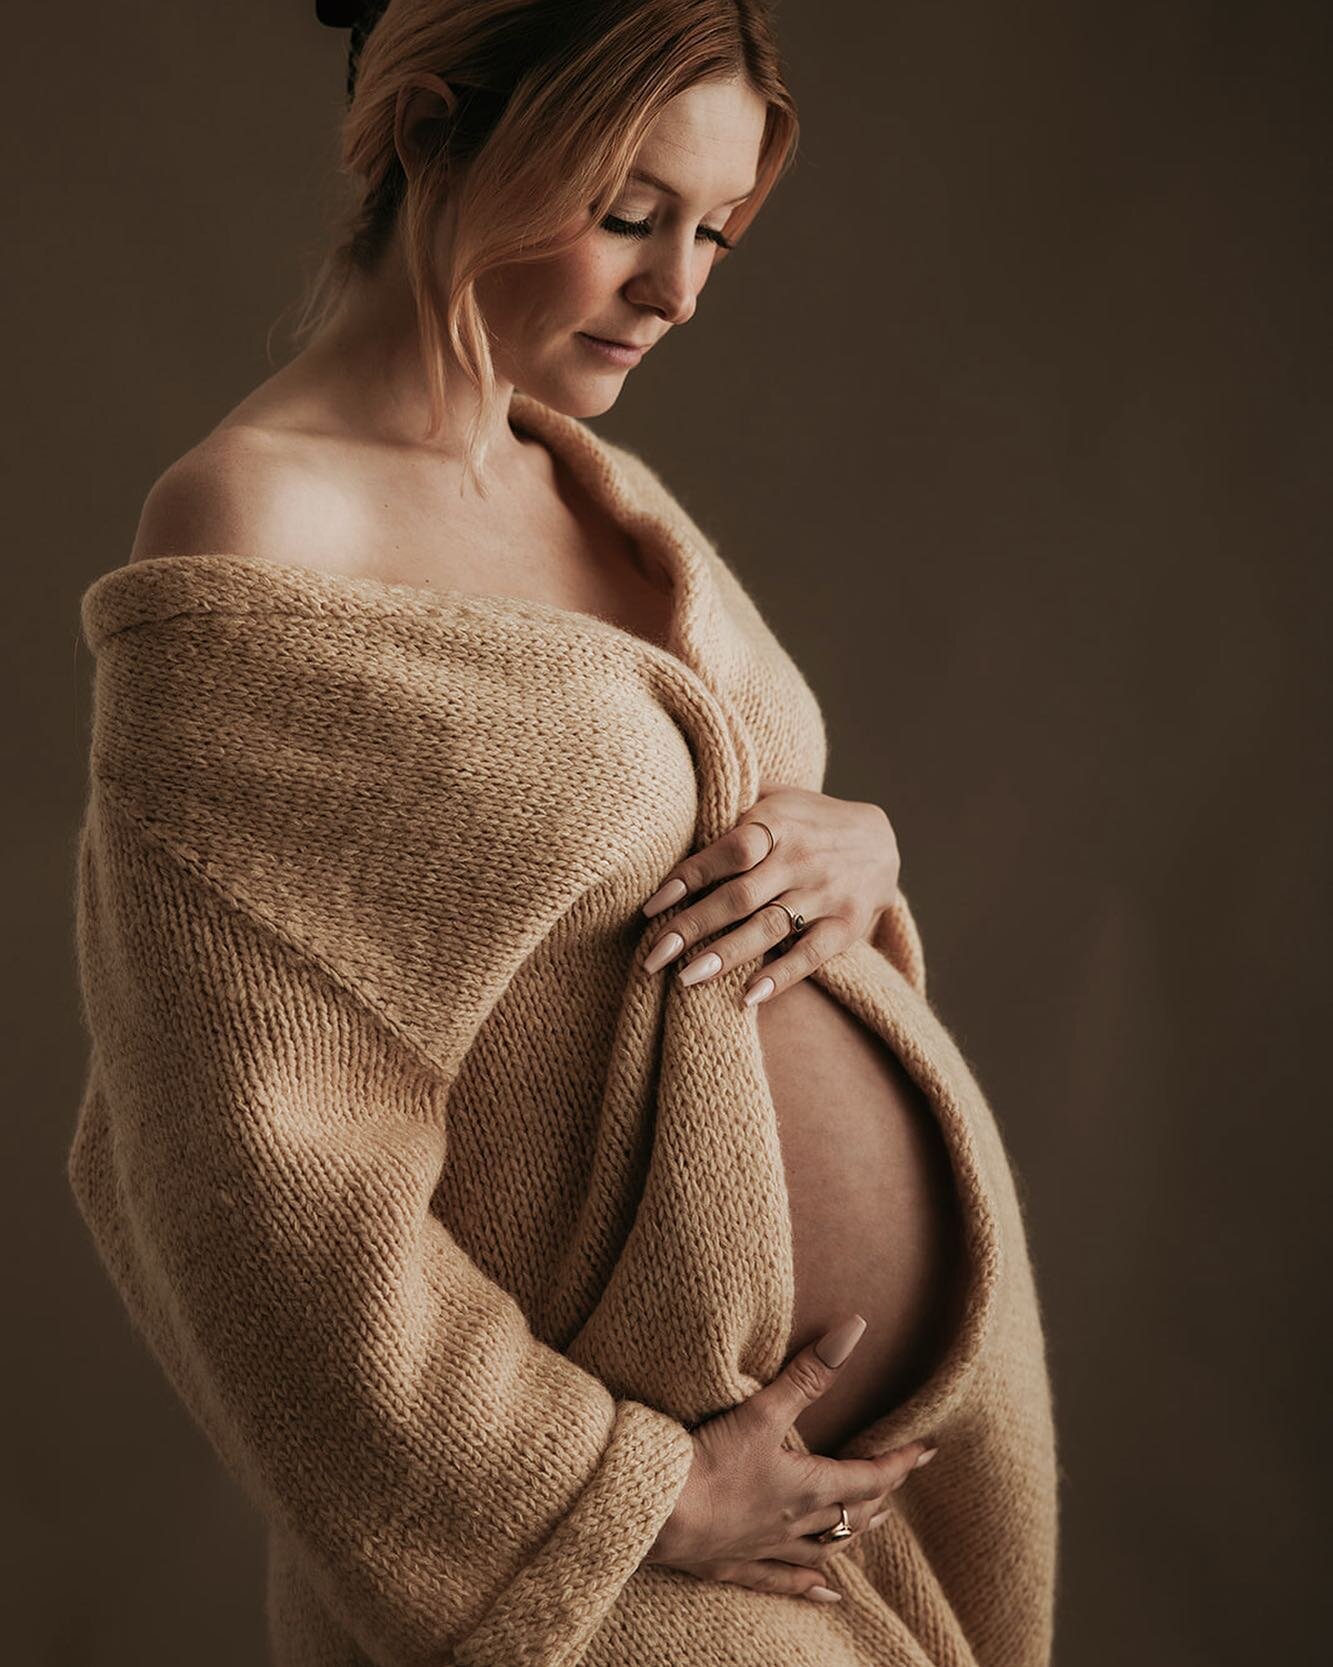 We went with natural colors for this maternity of shot @space.ailien to set a soft, graceful mood. Click link in bio and send a DM to book a maternity shoot!